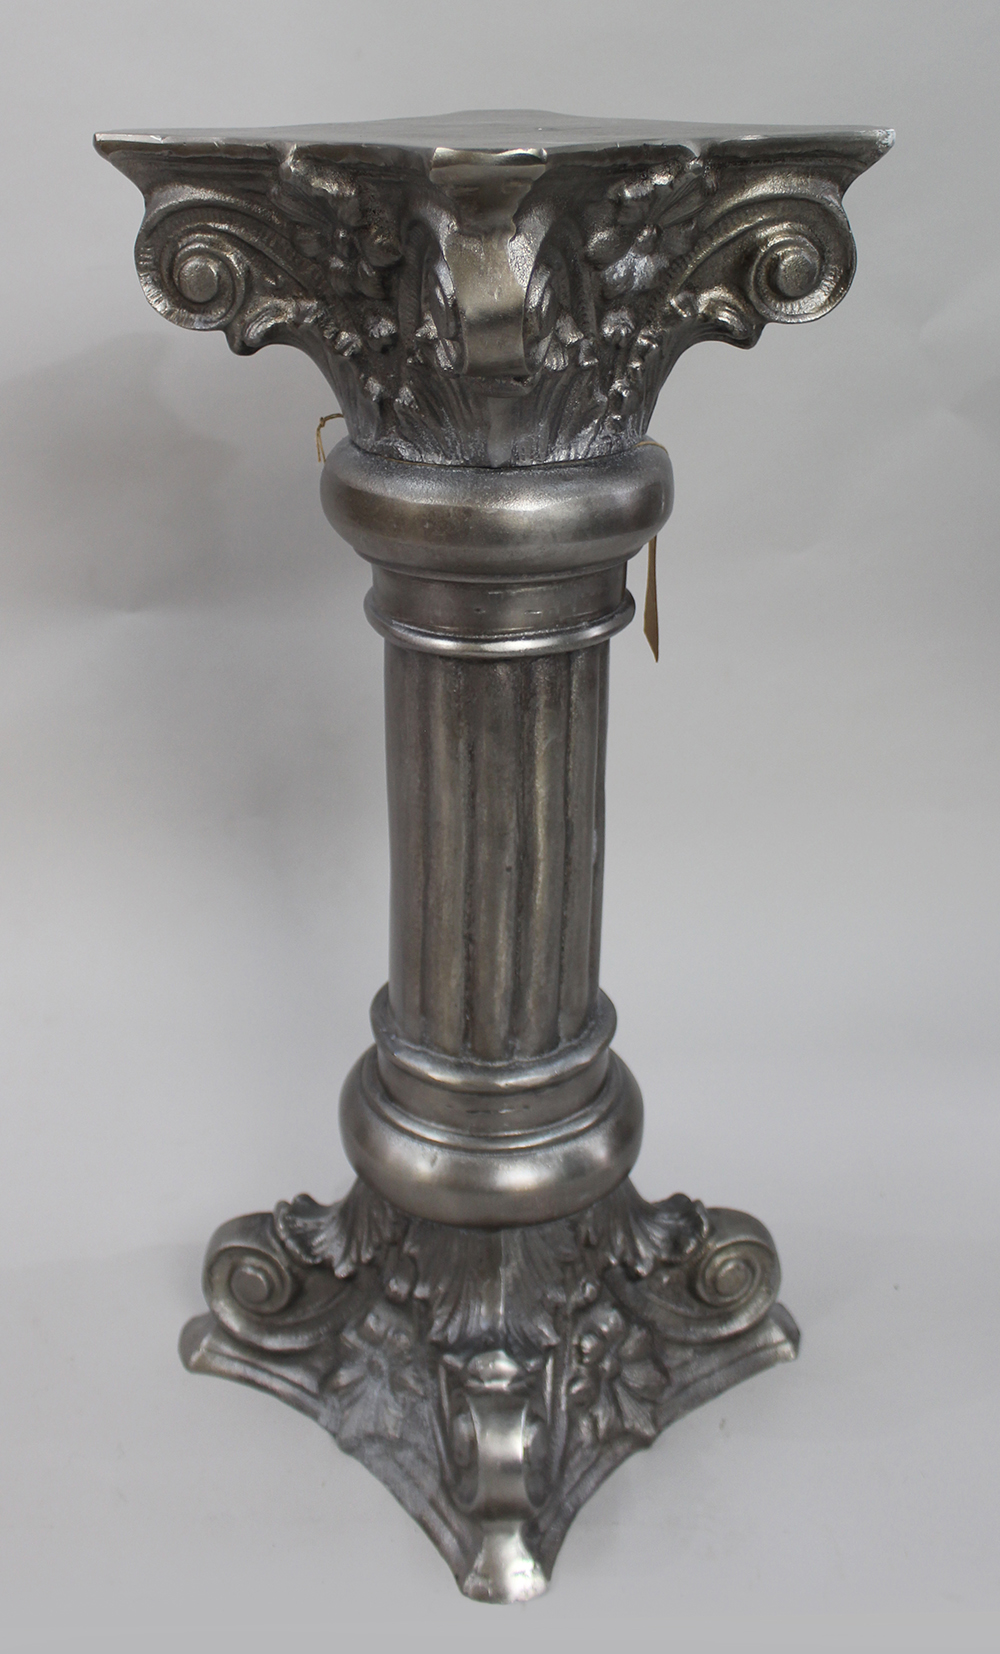 Pair of Ornate Silvered Column Pedestal Stand - Image 2 of 6